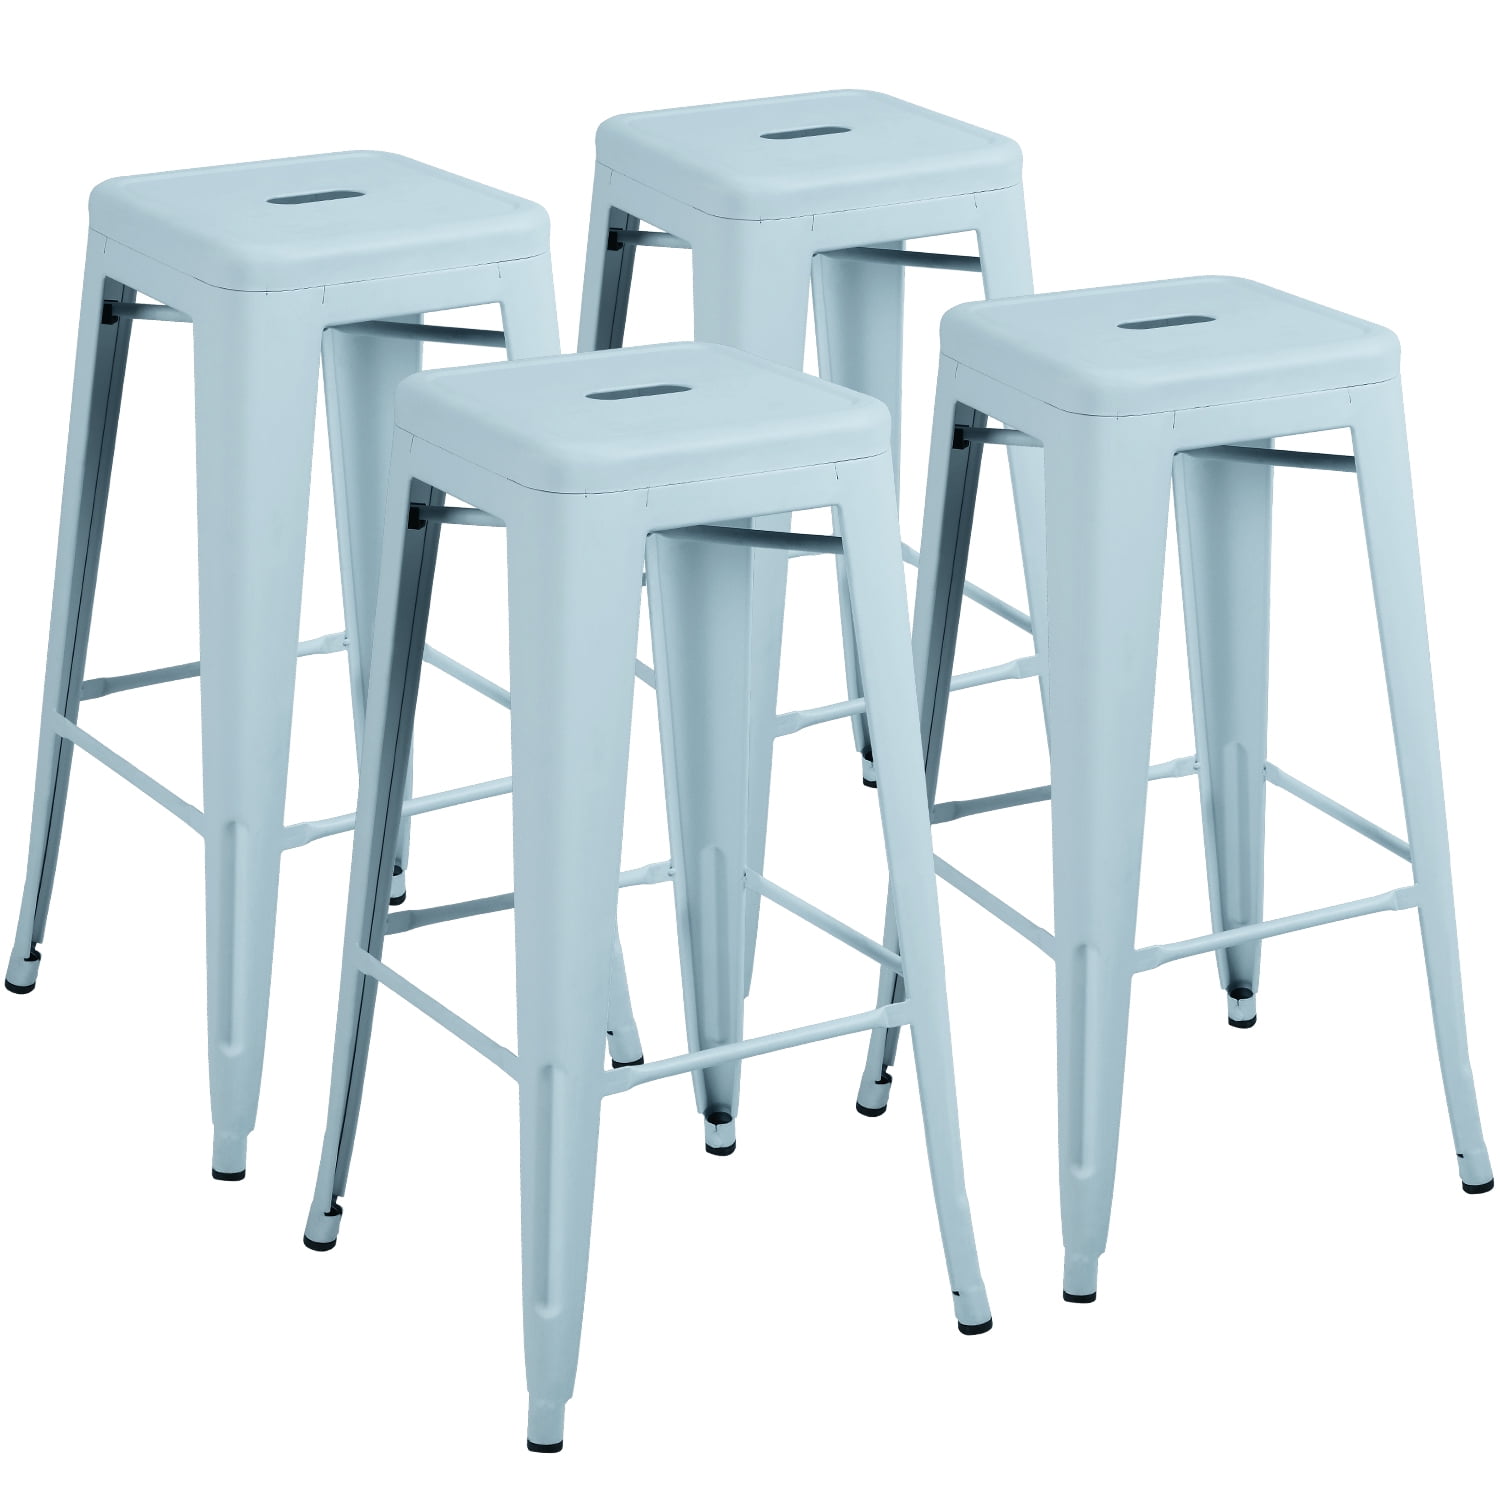 Furmax 30 Inches Metal Bar Stools High Backless Stools Indoor-Outdoor Stackable Stools Set of 4 Distressed White 